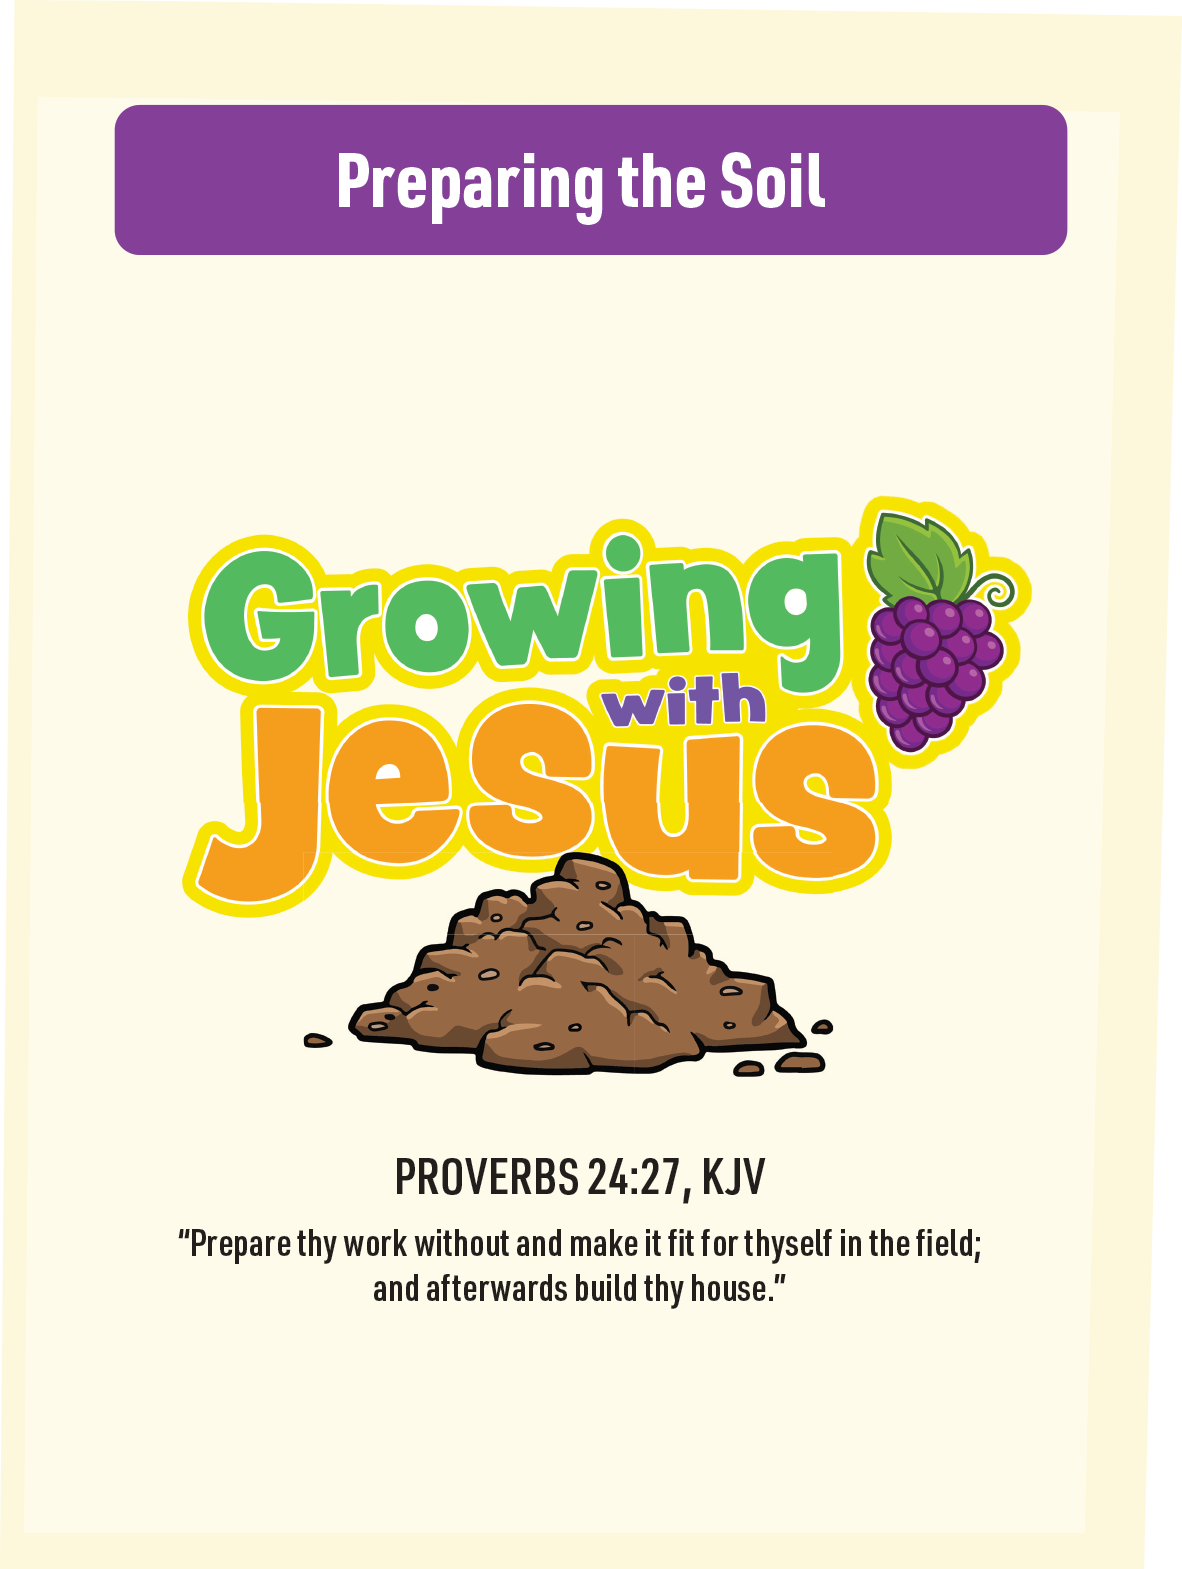 Growing With Jesus Leader's Guide (Physical Book)